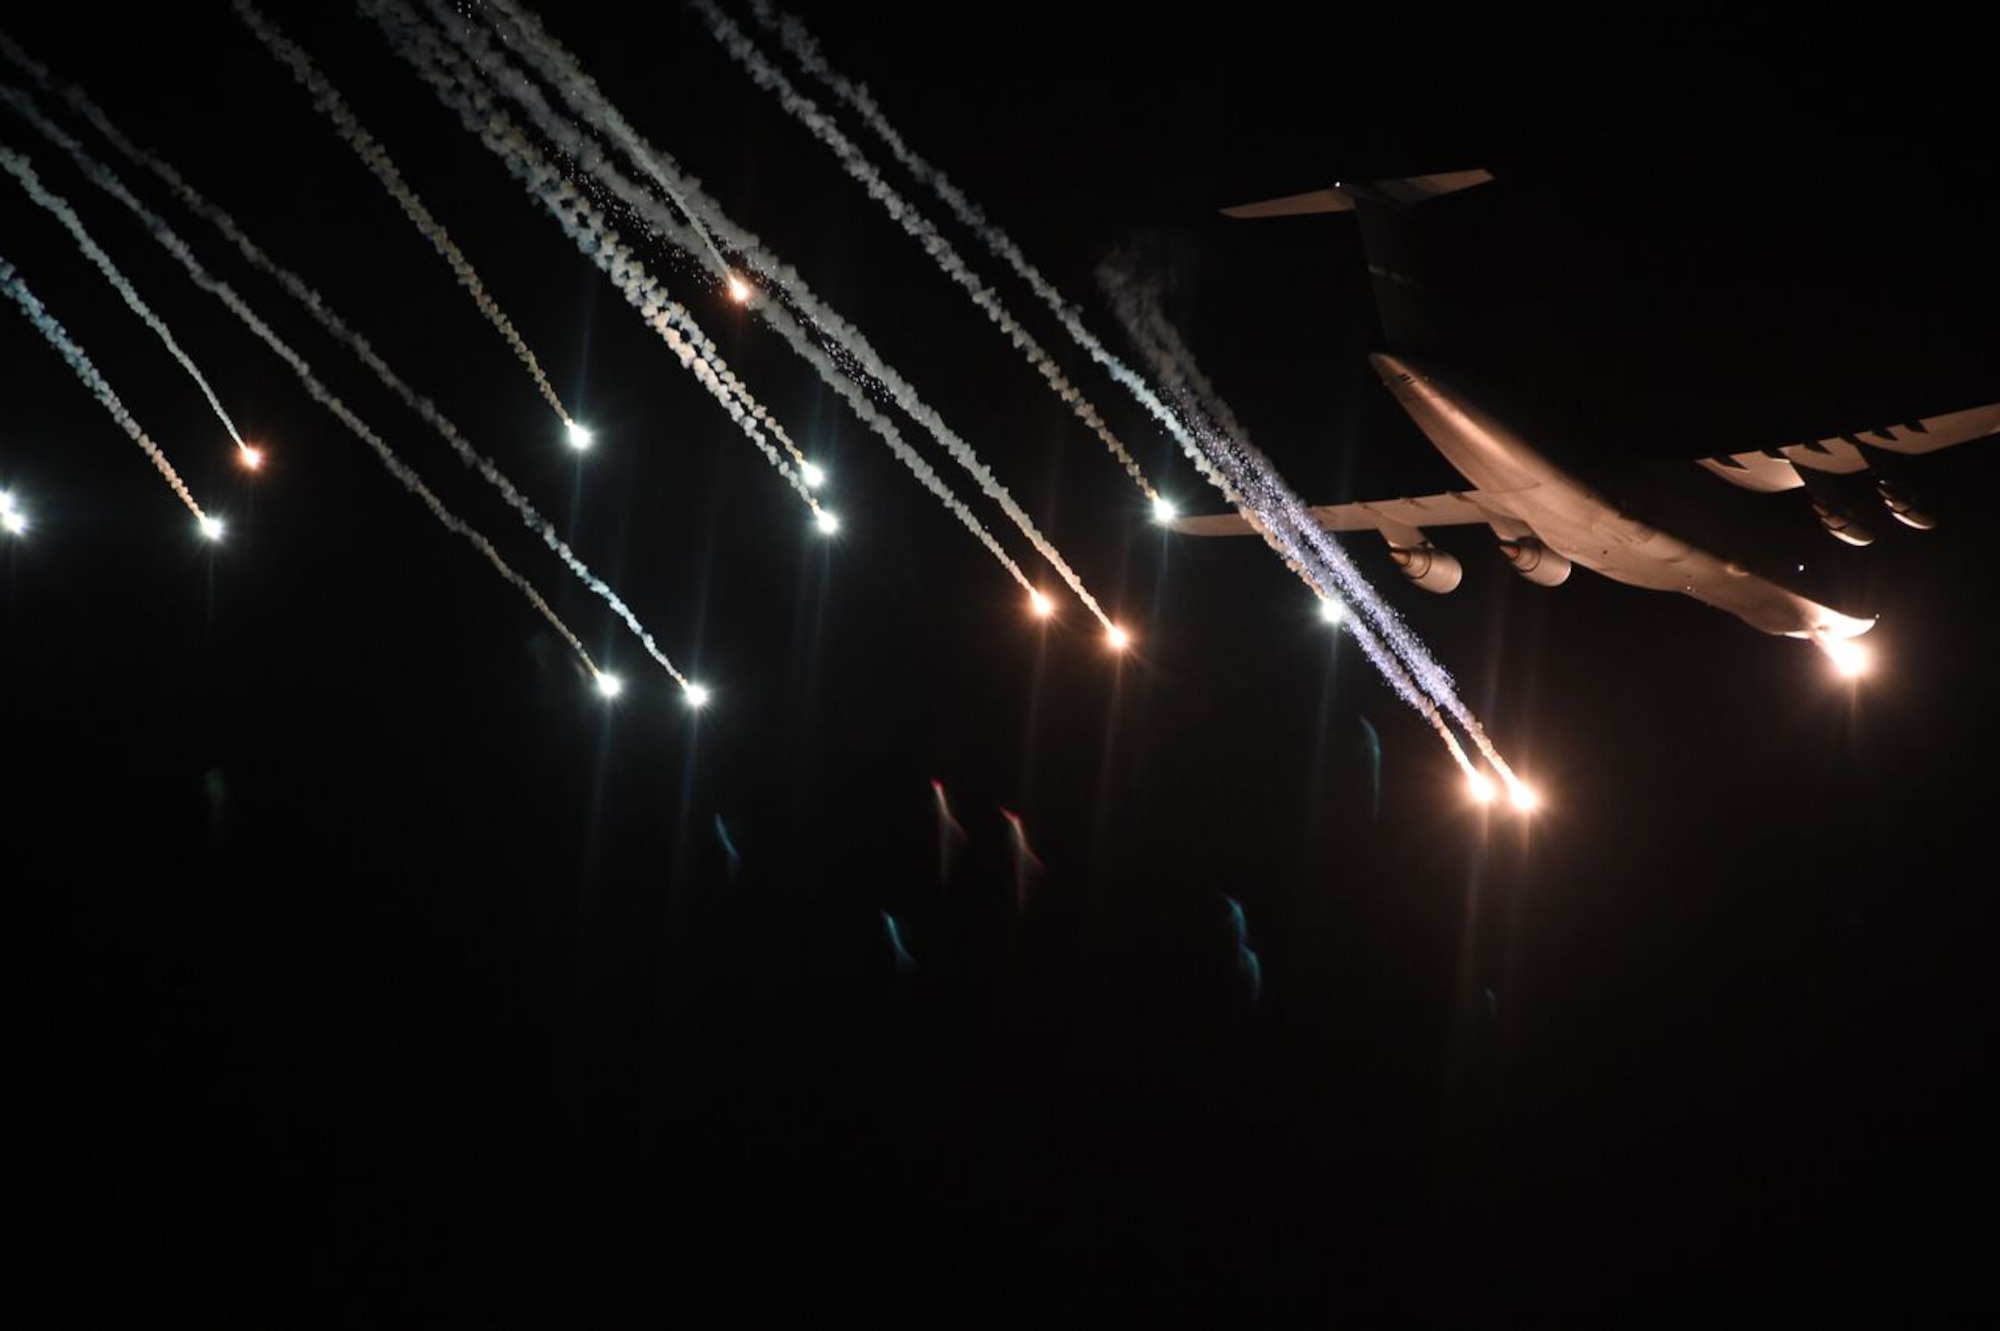 A C-5 from Travis Air Force Base, Calif., ejects flares over the Eglin Range March 2, 2016, at Eglin AFB, Fla. The C-5 aircraft was participating in Air Mobility Command flare effectiveness testing at Eglin AFB  to ensure the infrared countermeasures are working as intended. The C-5 and C-17 ejected several flare patterns over a week long testing period. (U.S. Air Force photo/Staff Sgt. Naomi Shipley)